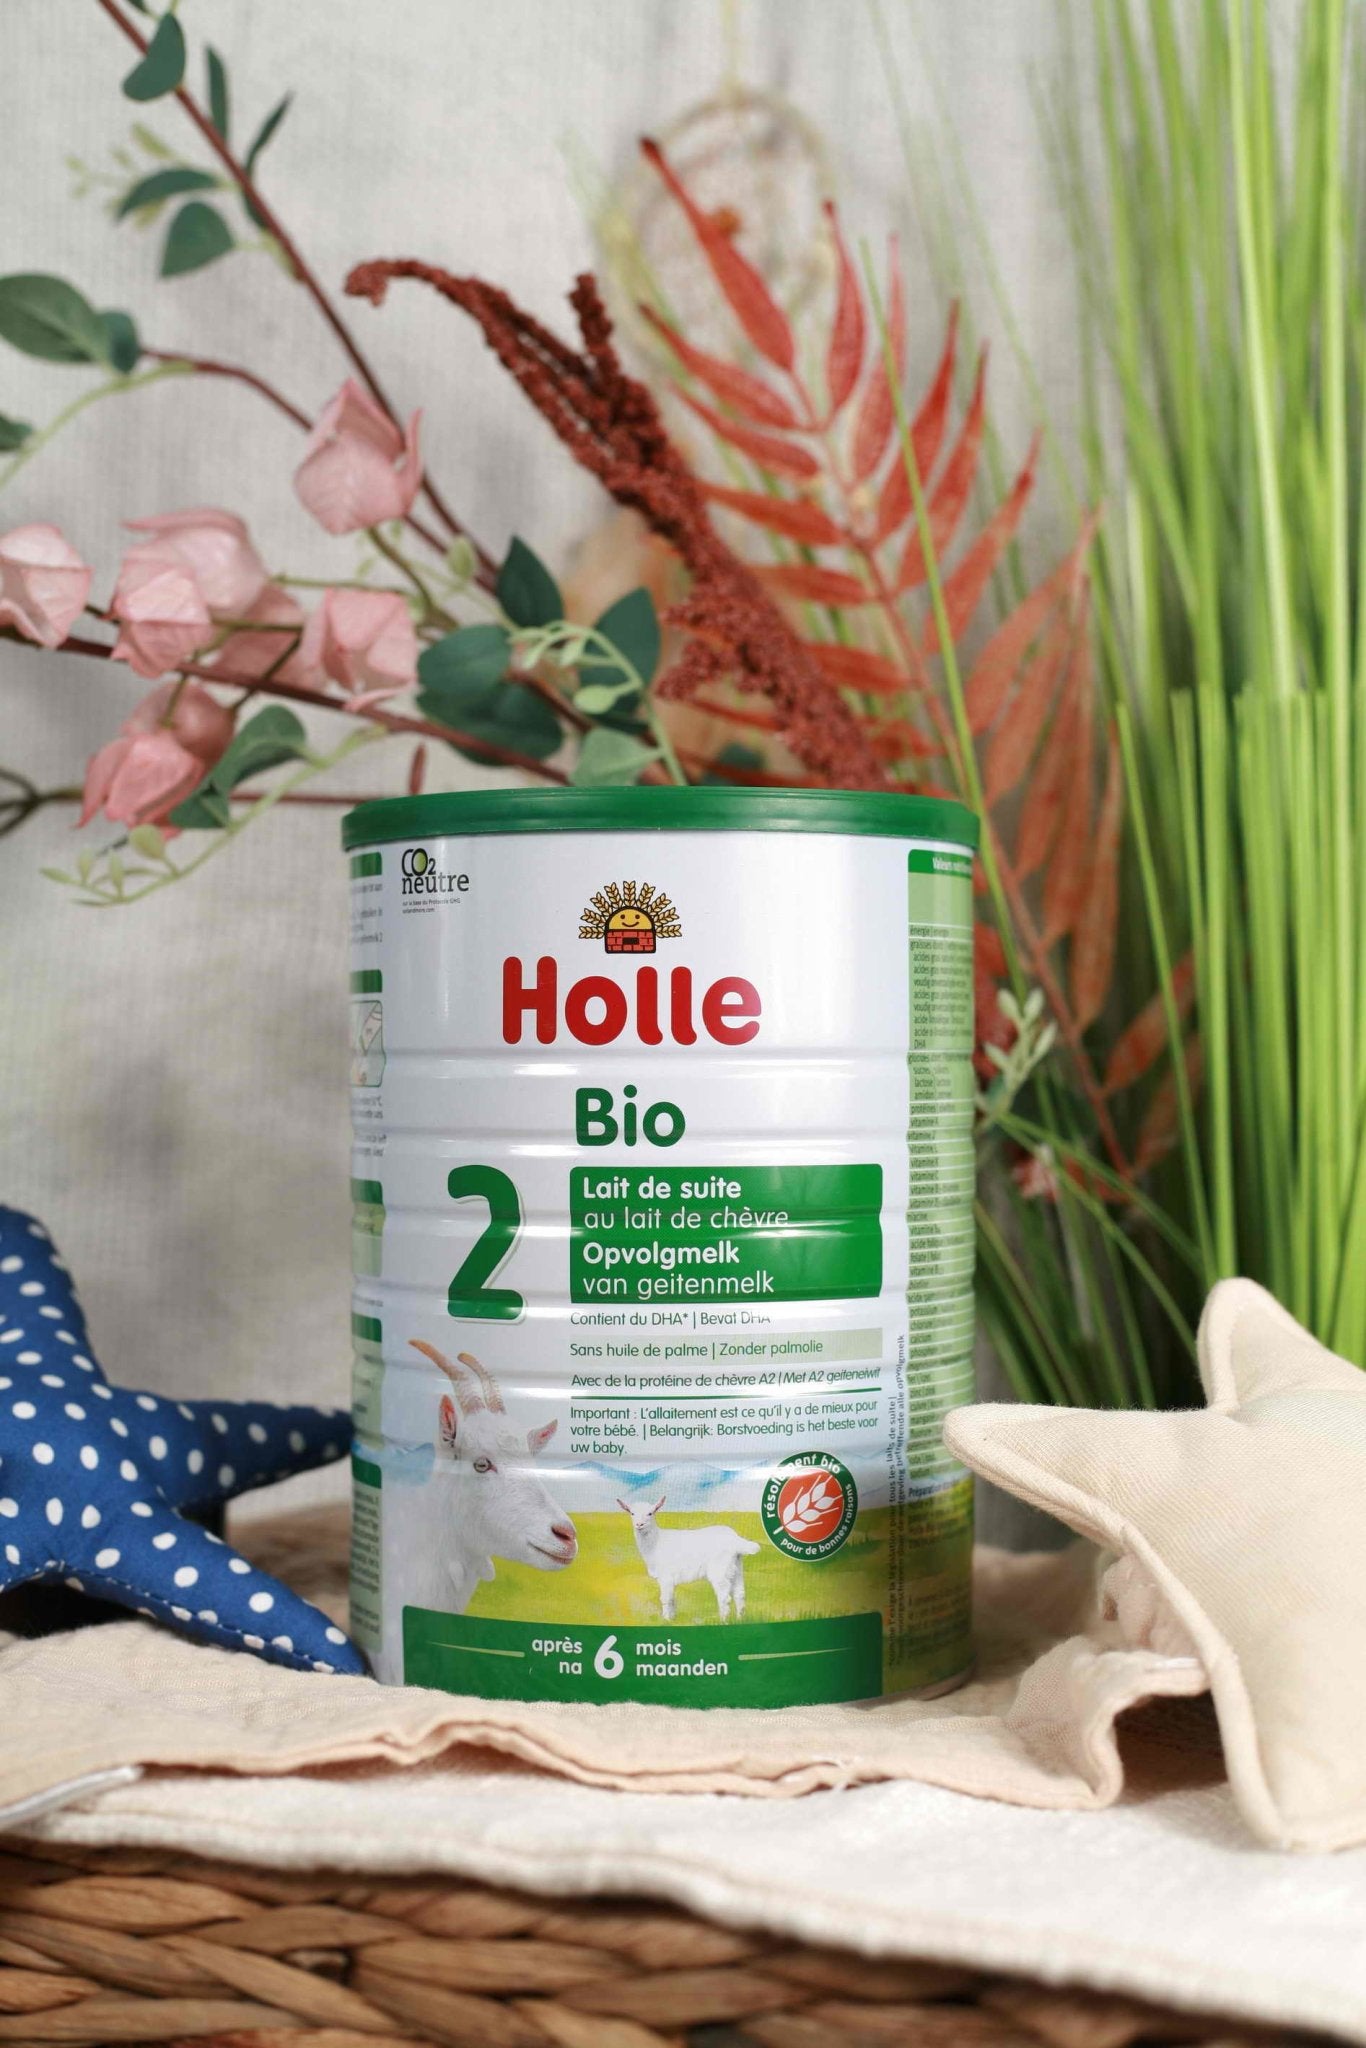 Holle Goat Milk Stage 2 Formula - Suitable from 6th Month